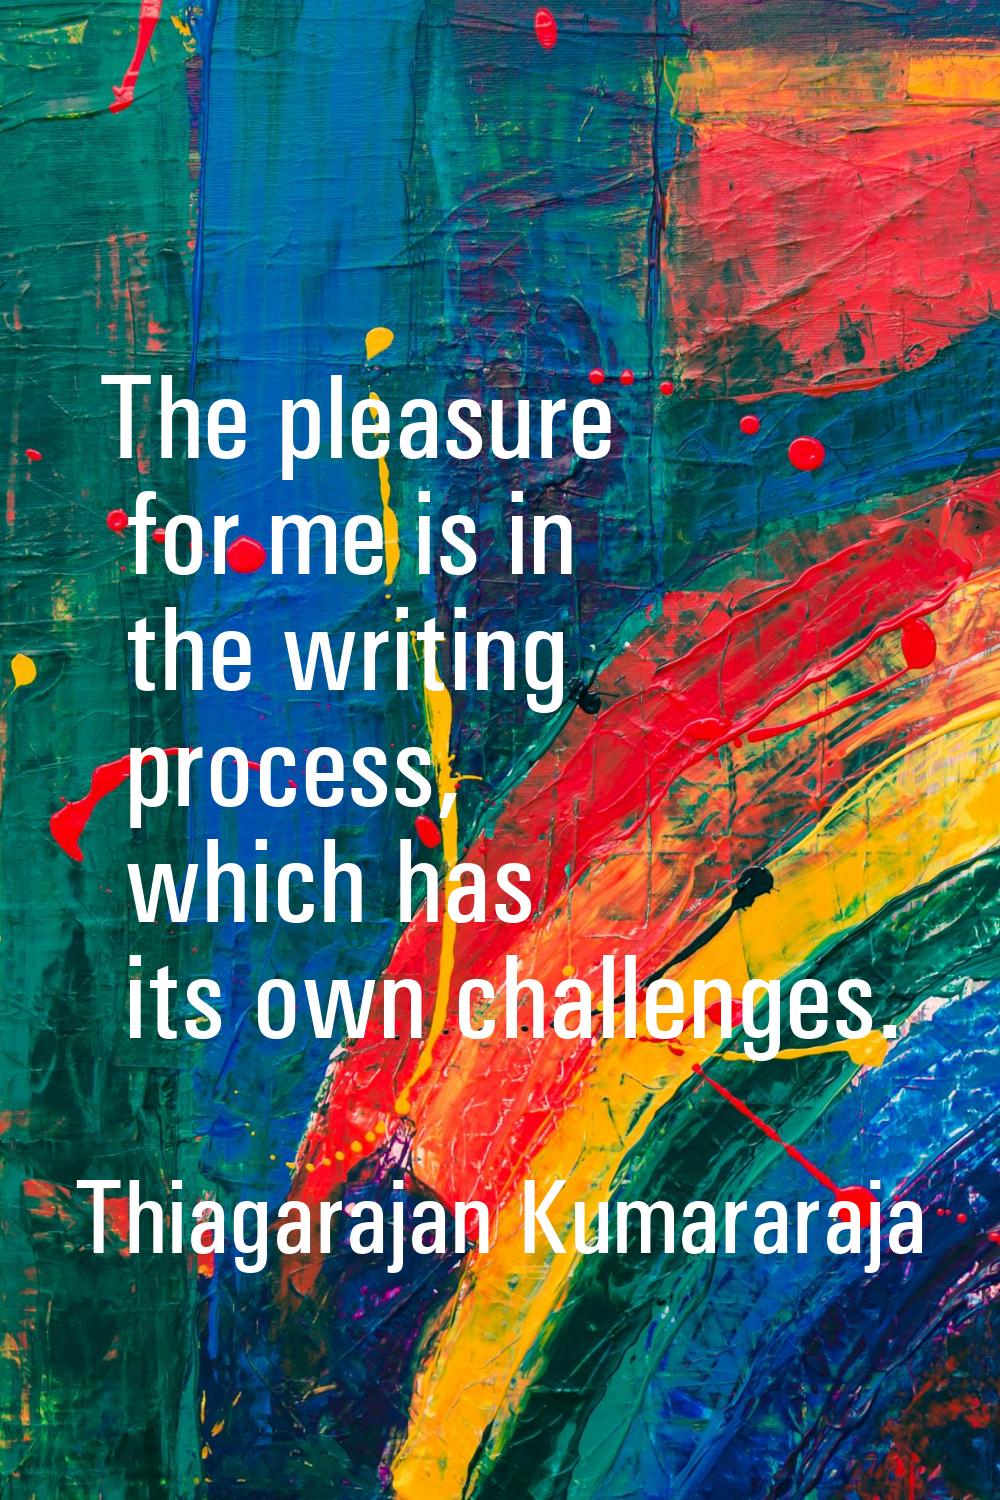 The pleasure for me is in the writing process, which has its own challenges.